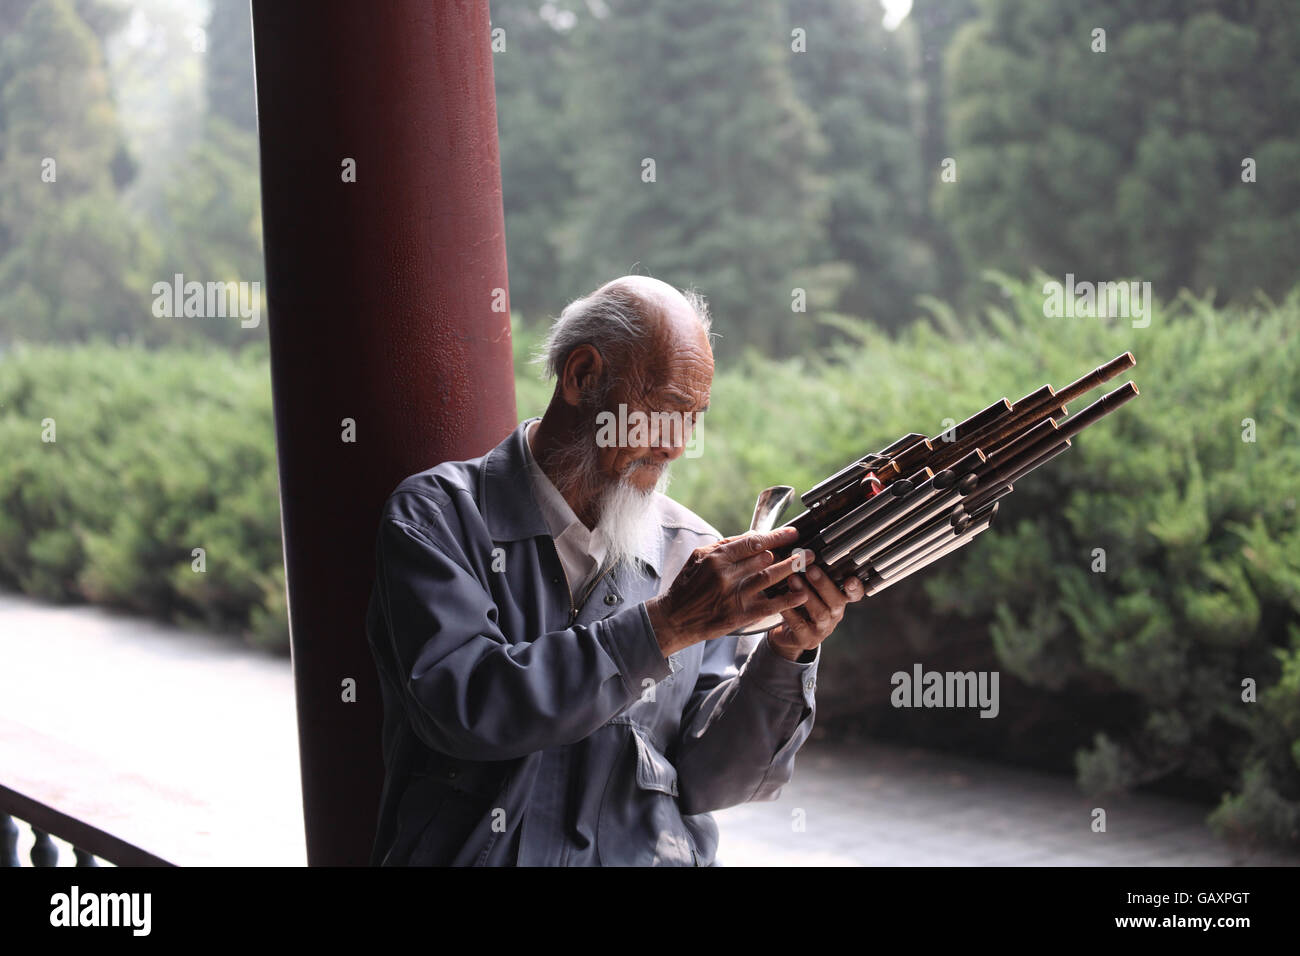 An old Chinese  man with a white beard examines his Sheng or yu which is a Chinese mouth blown free reed wind instrument Stock Photo